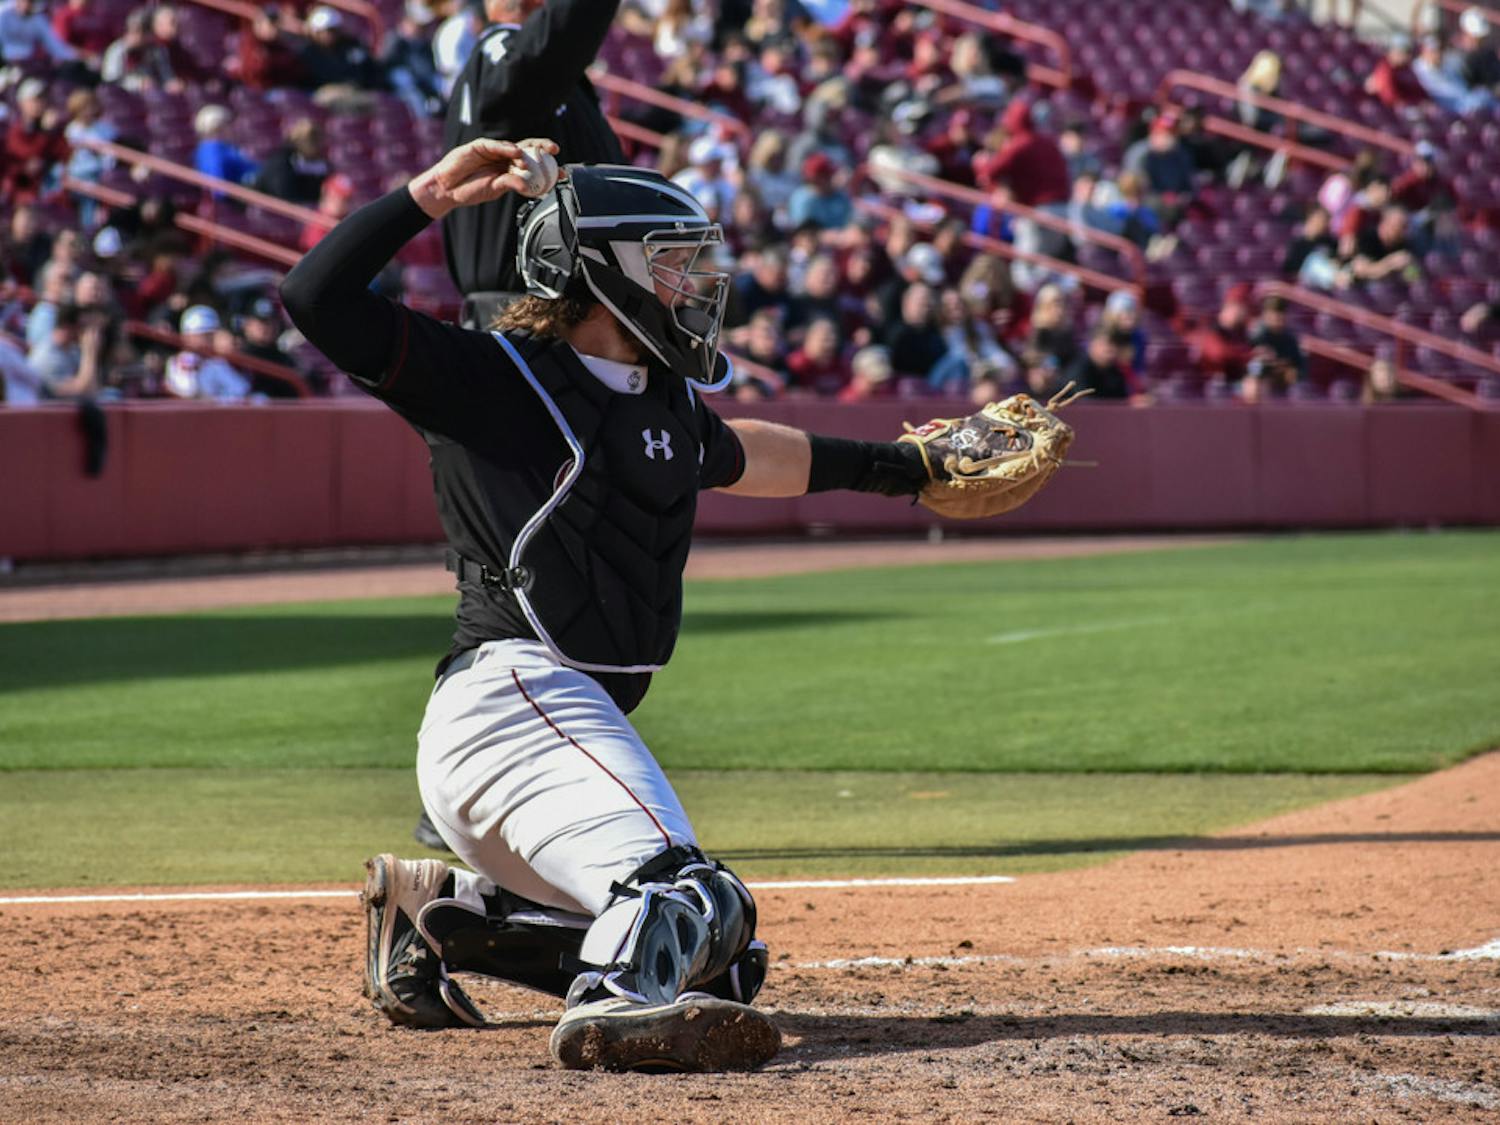 Sophomore catcher Talmadge LeCroy catches the ball in-between innings during the game on February 19, 2023. The South Carolina baseball team won against UMass Lowell 12-1.